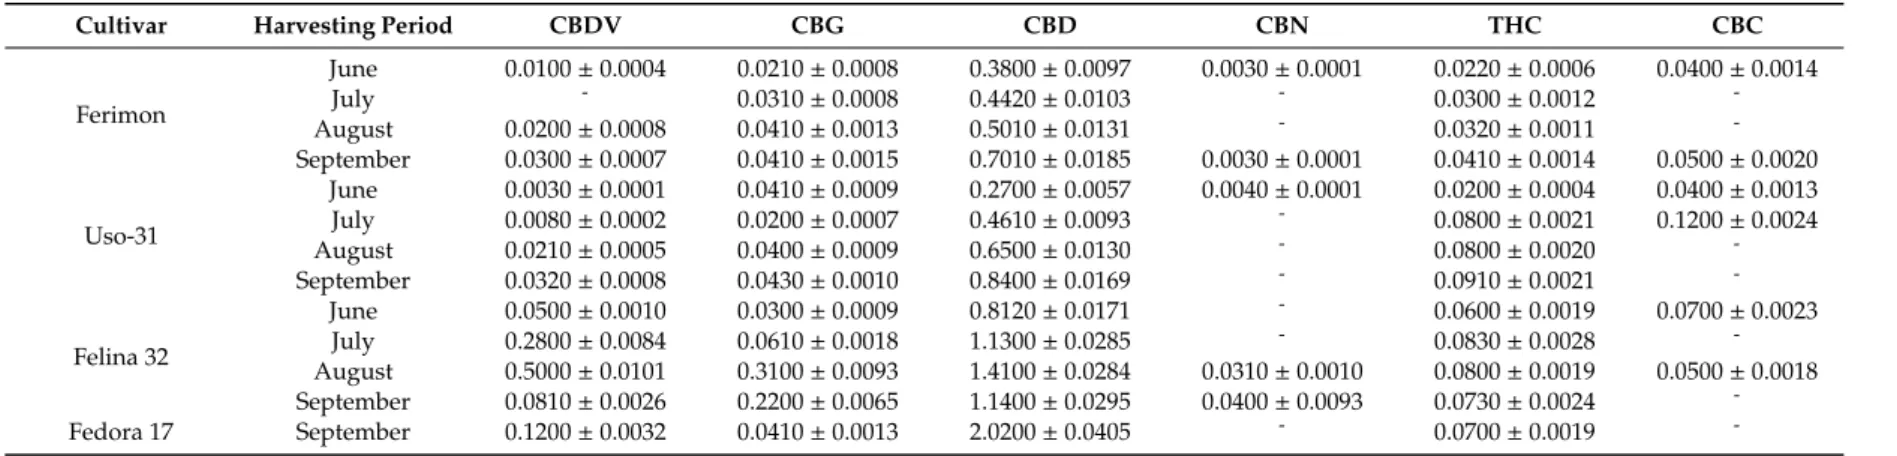 Table 2. UHPLC cannabinoids concentration in Ferimon, Uso-31, Felina 32 and Fedora 17 cultivars over the season